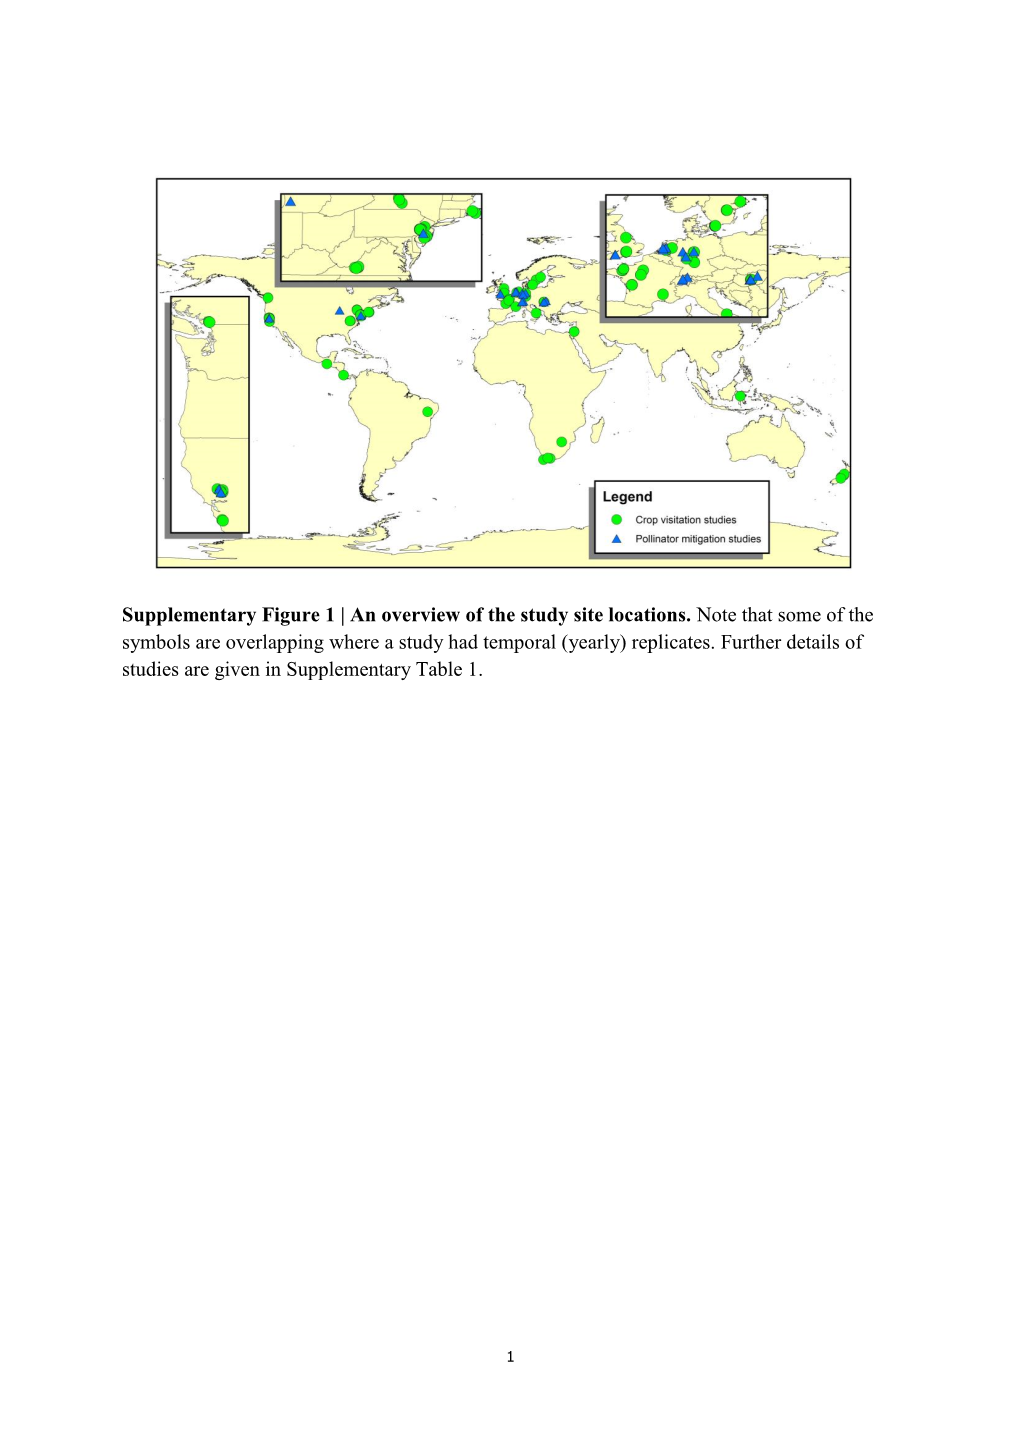 Supplementary Figure 1 | an Overview of the Study Site Locations